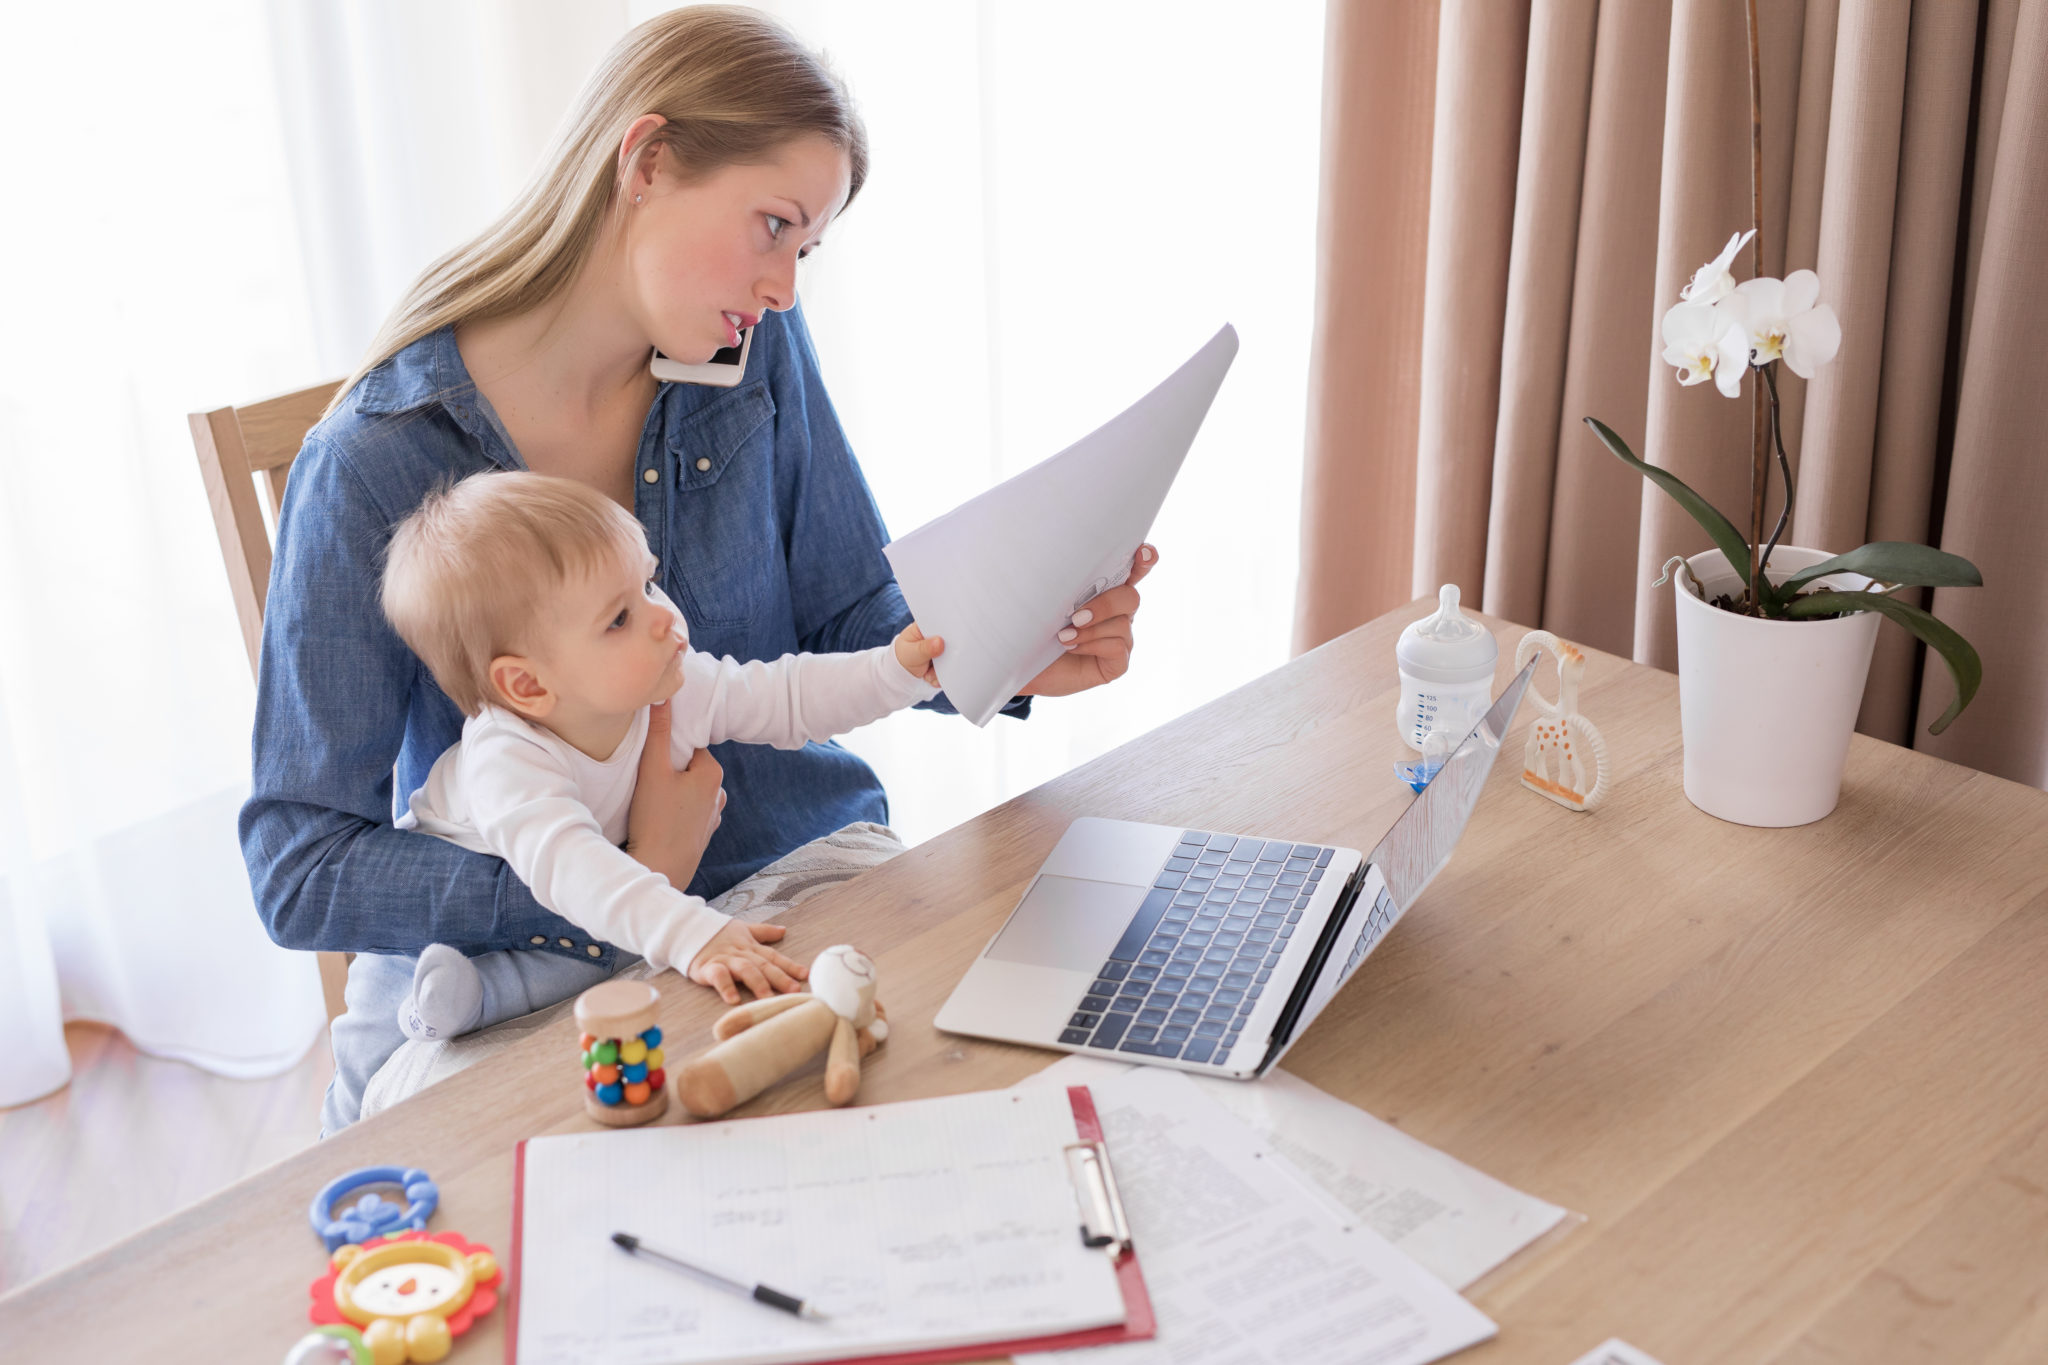 Mom reading papers with baby on lap